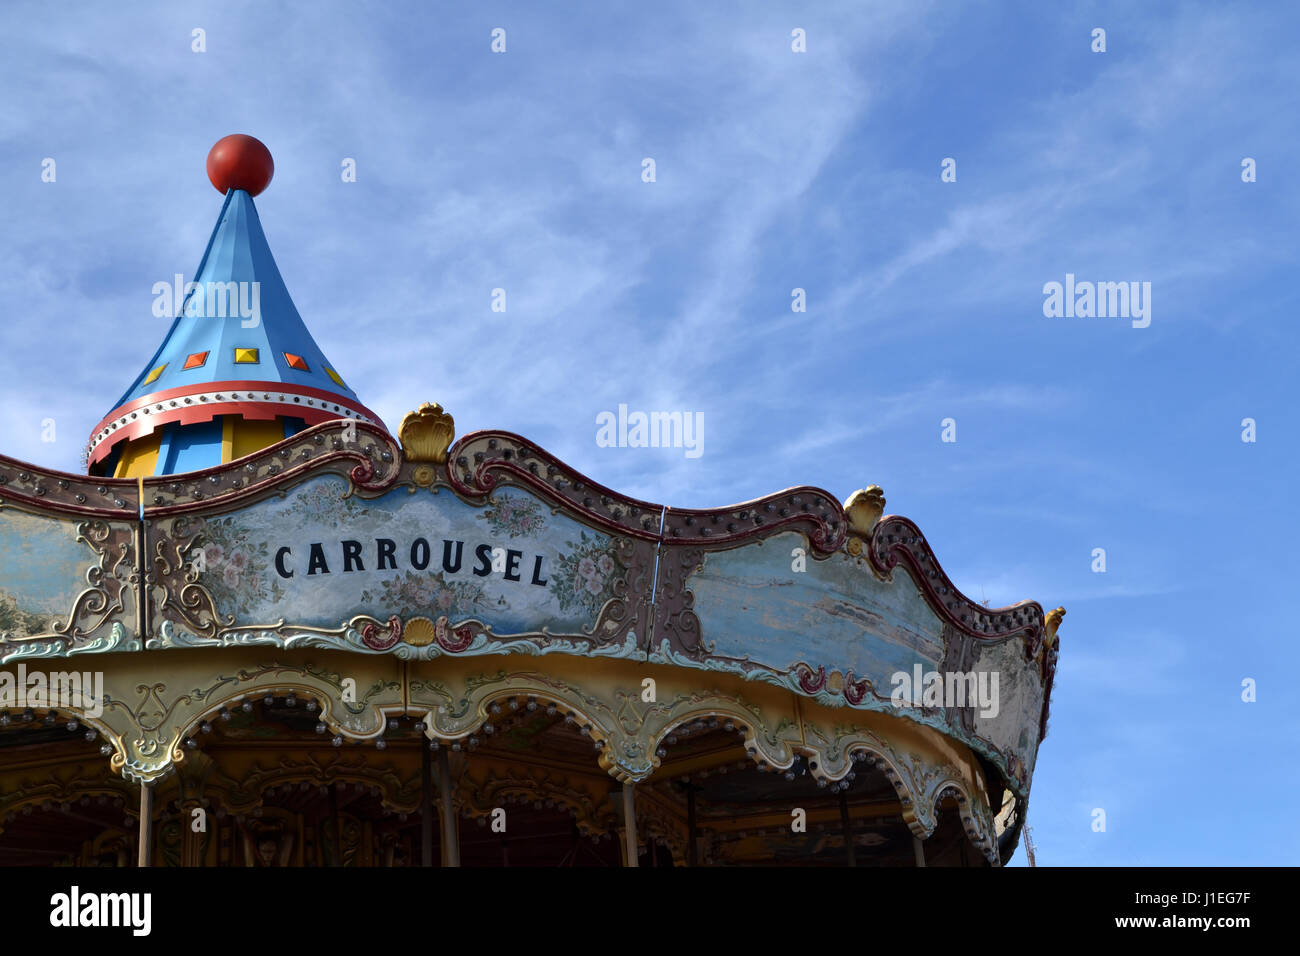 Closeup of a old carousel on a blue sky Stock Photo